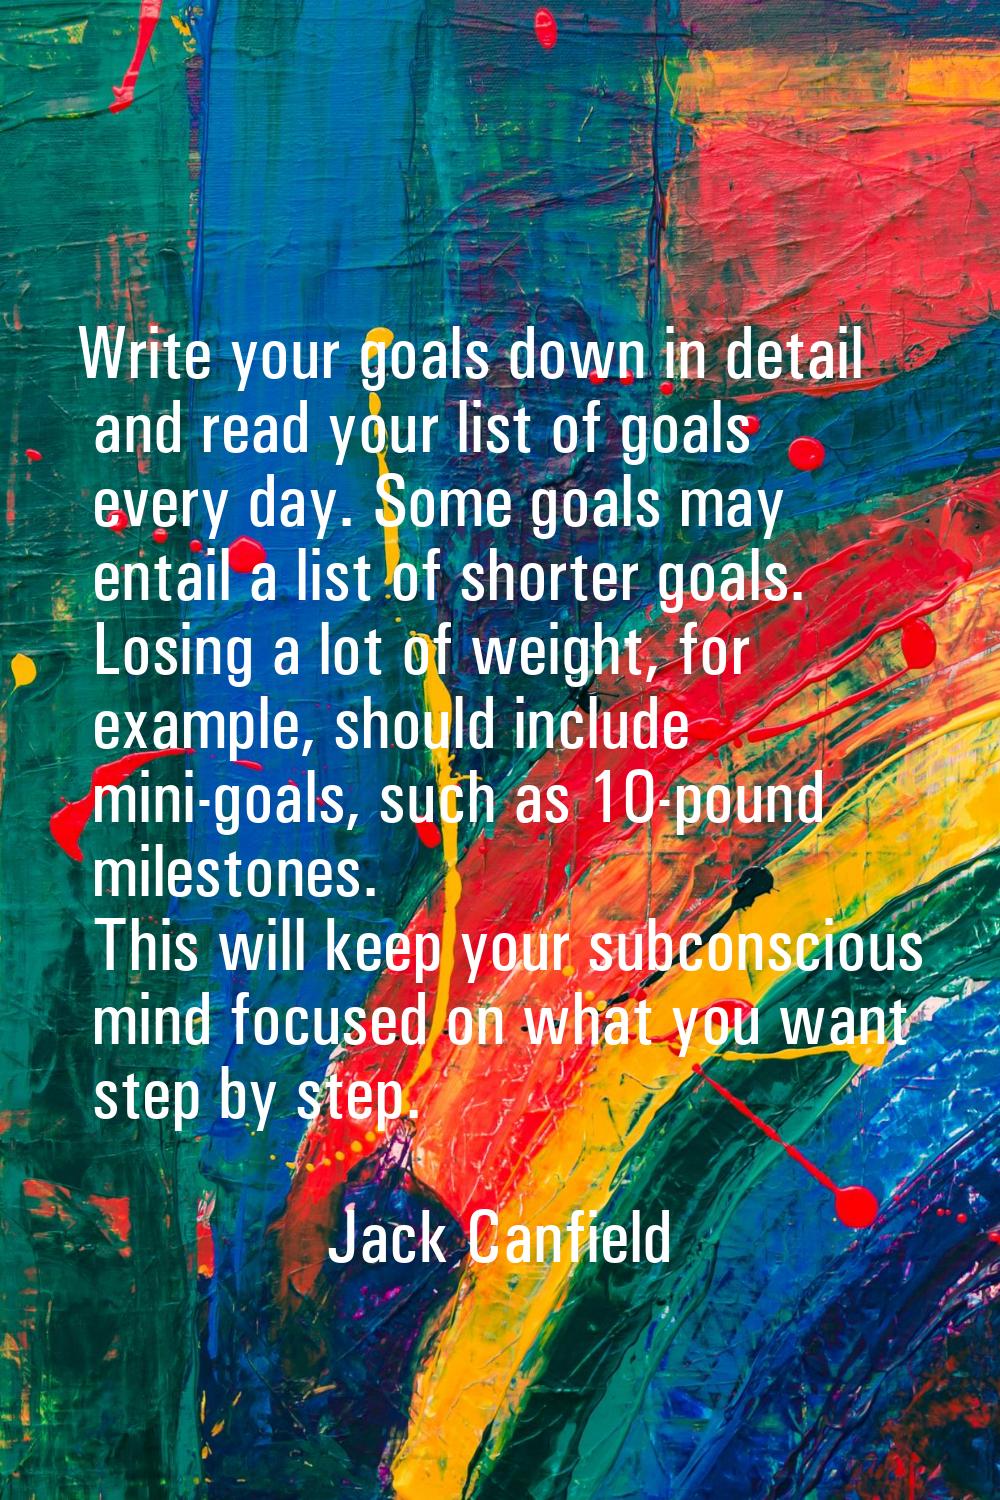 Write your goals down in detail and read your list of goals every day. Some goals may entail a list